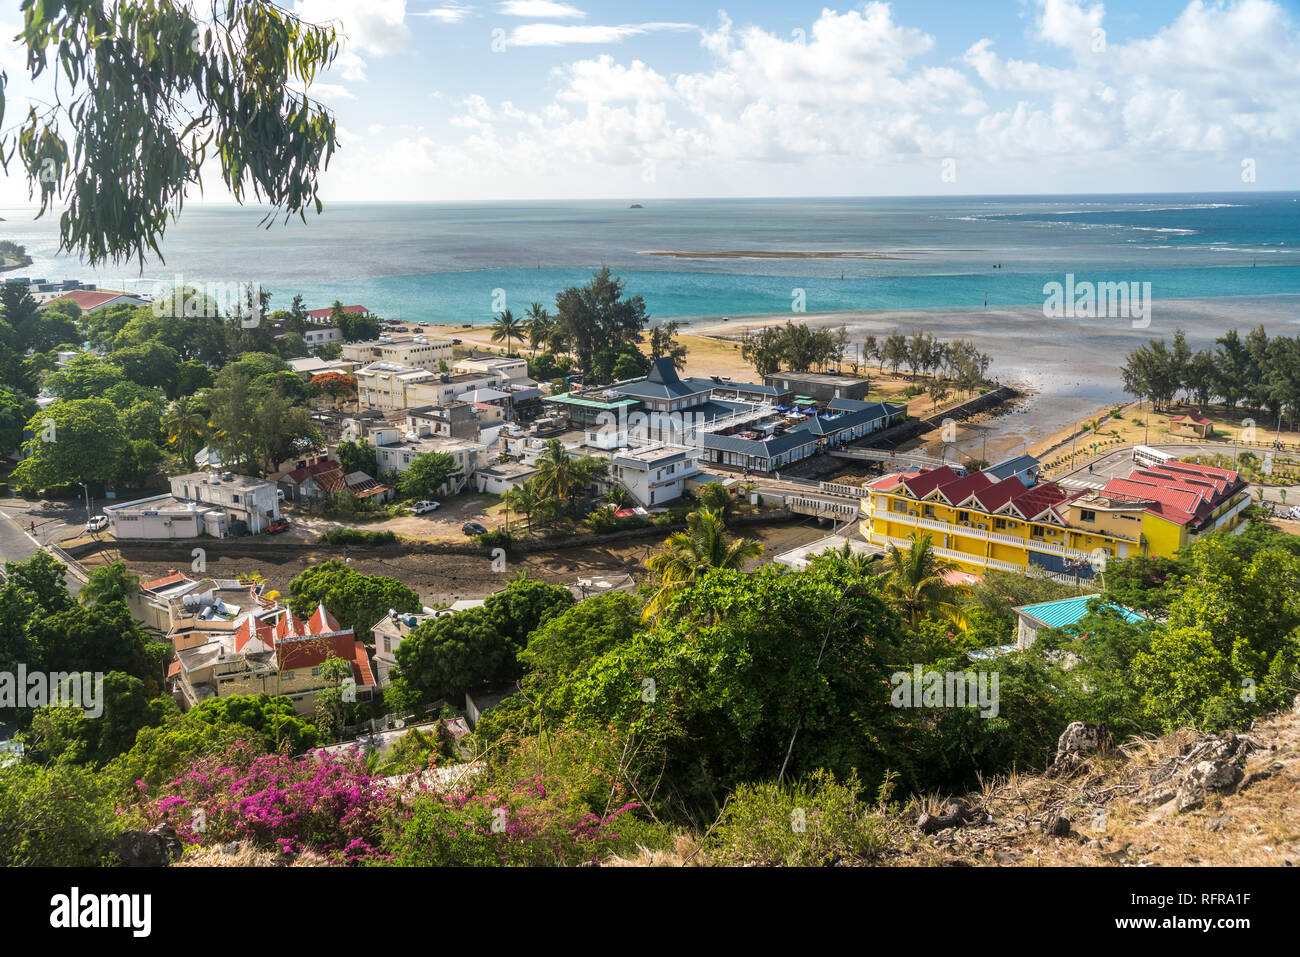 Hauptstadt Port Mathurin, Rodrigues, Maurice Insel | Port Mathurin, Rodrigues, l'île Maurice, l'Afrique Banque D'Images